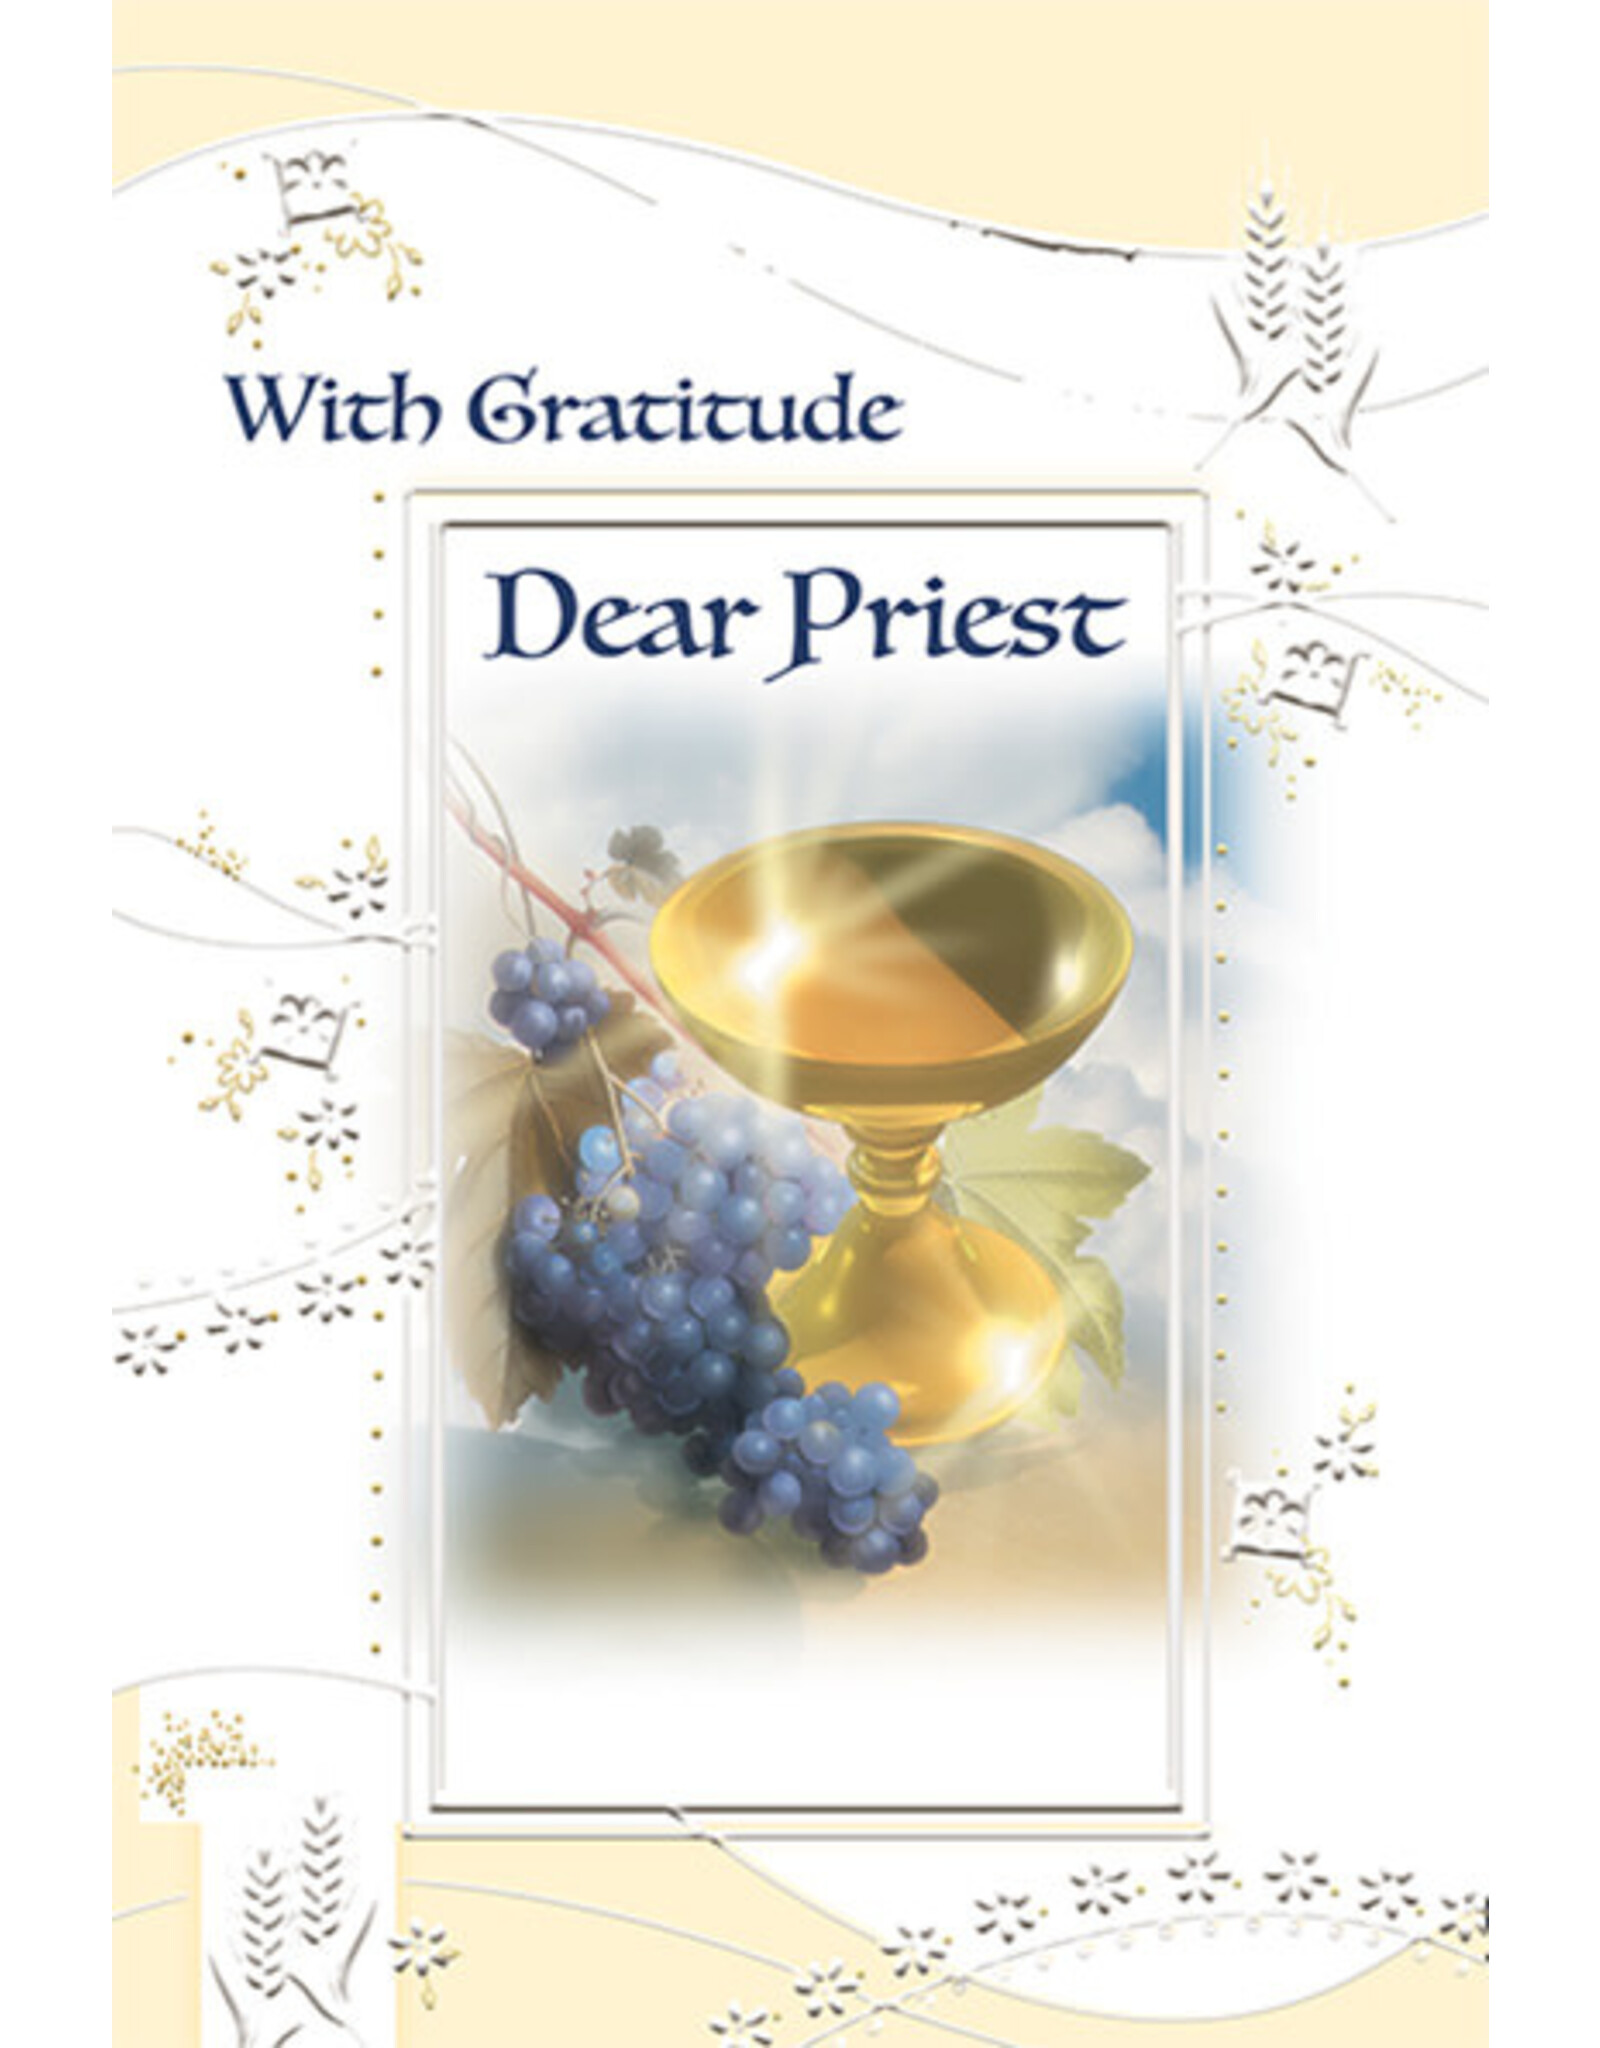 Greetings of Faith Card - Thank You Priest, With Gratitude